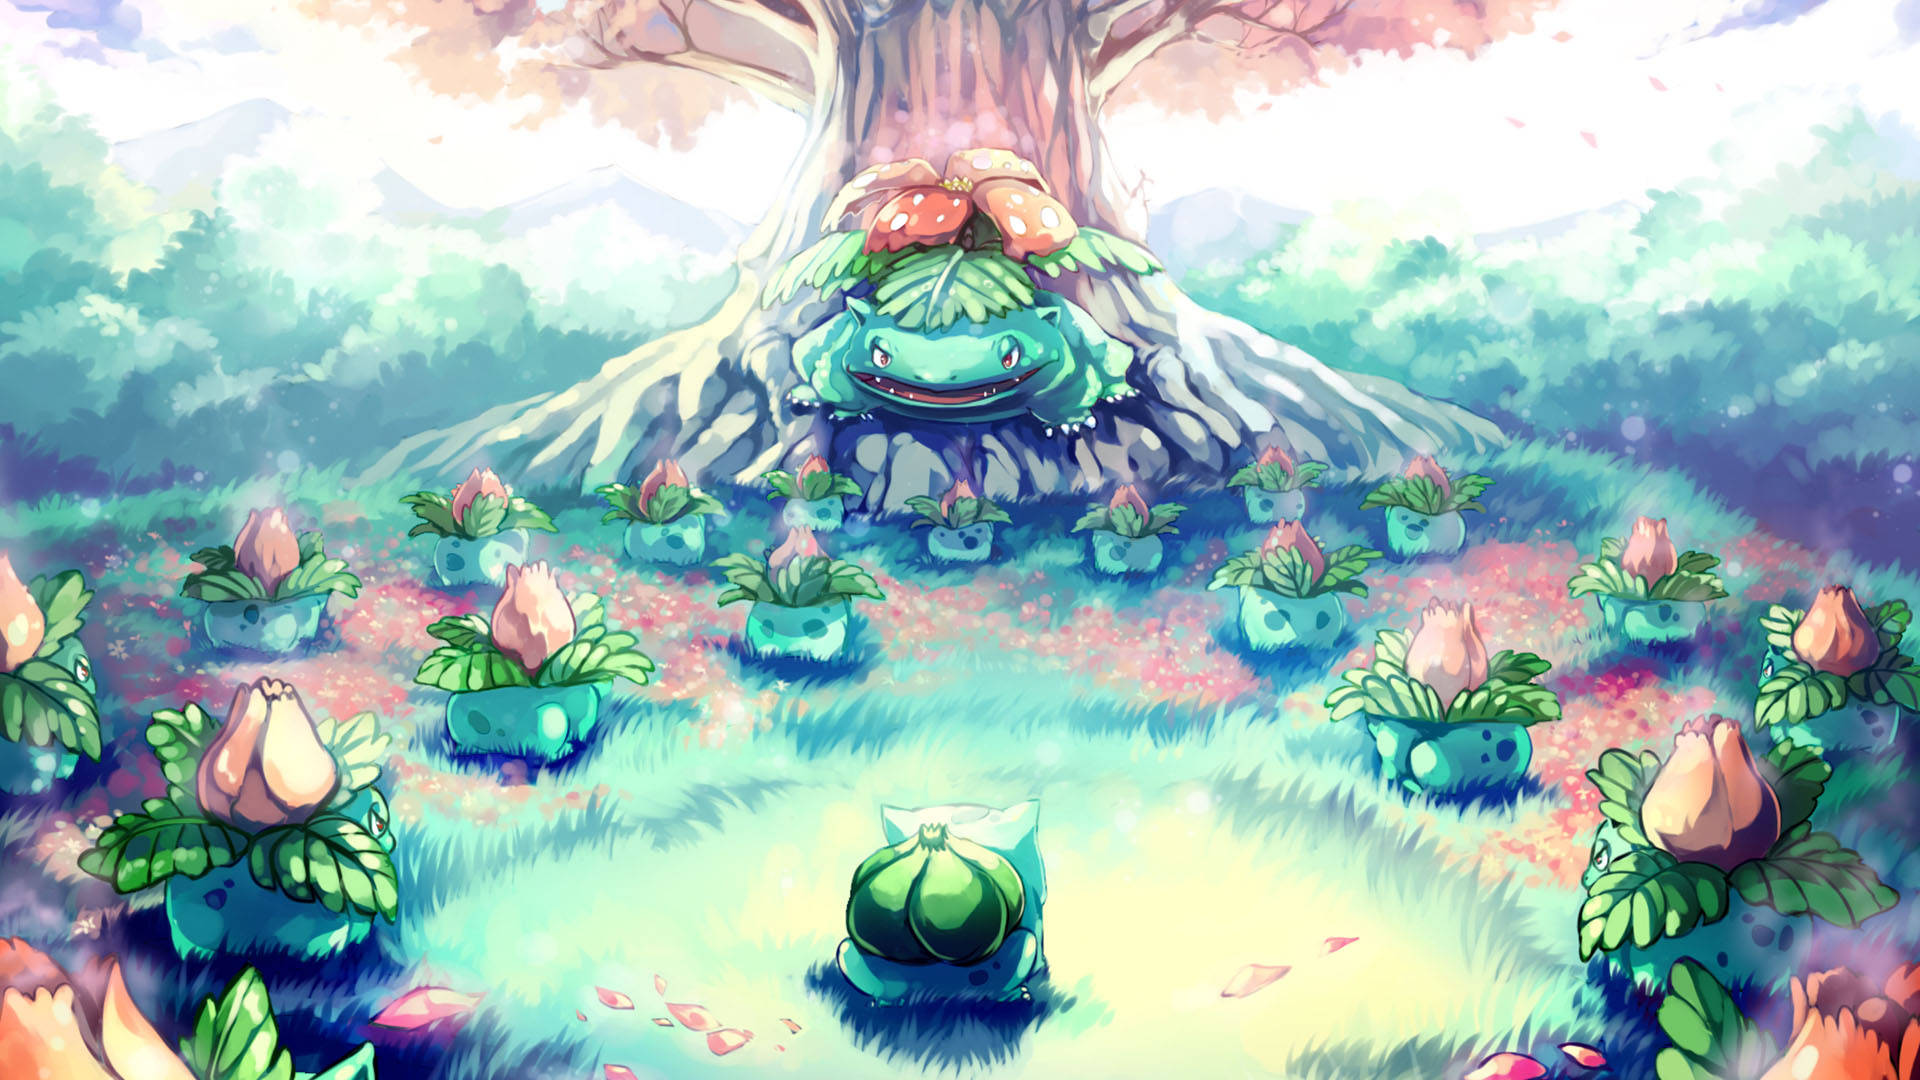 Bulbasaur Swinging On A Tree Branch In A Forest Background